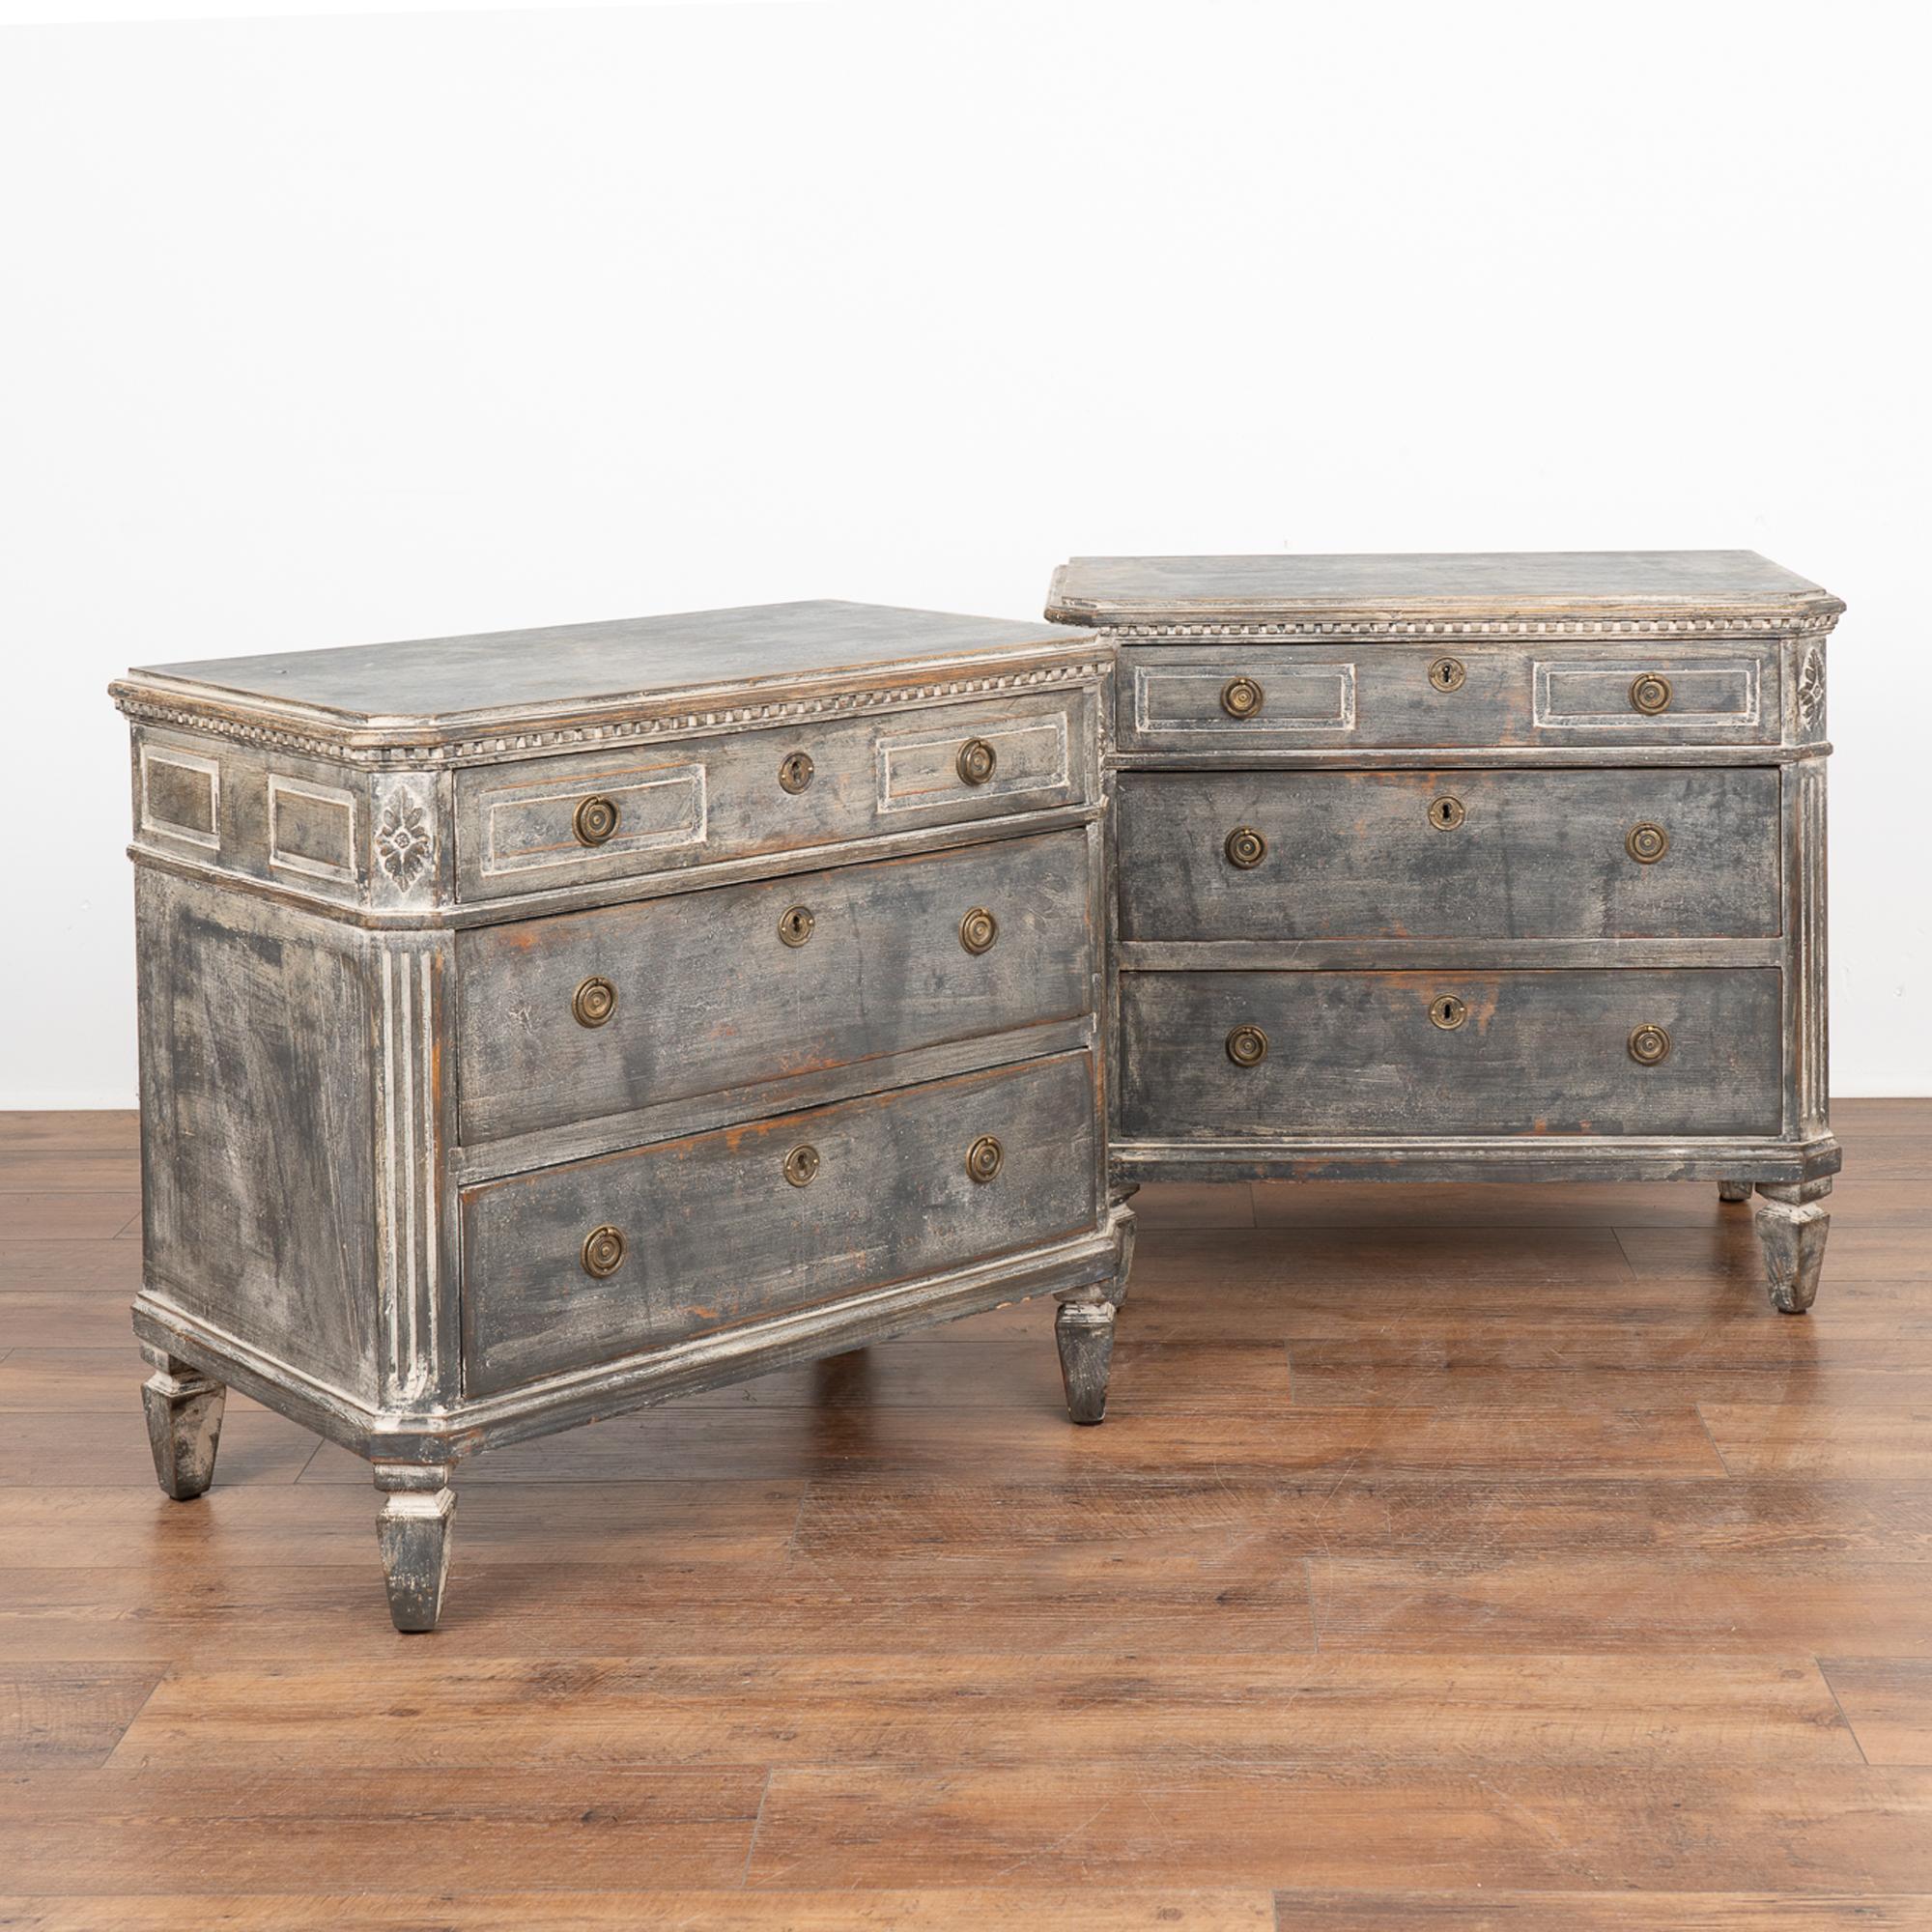 A pair of decorative Gustavian pine chest of drawers with canted fluted side posts with upper carved medallion, dentil molding, all raised on four tapered fluted feet.
The newer, professionally applied layered painted finish of gray, charcoal and